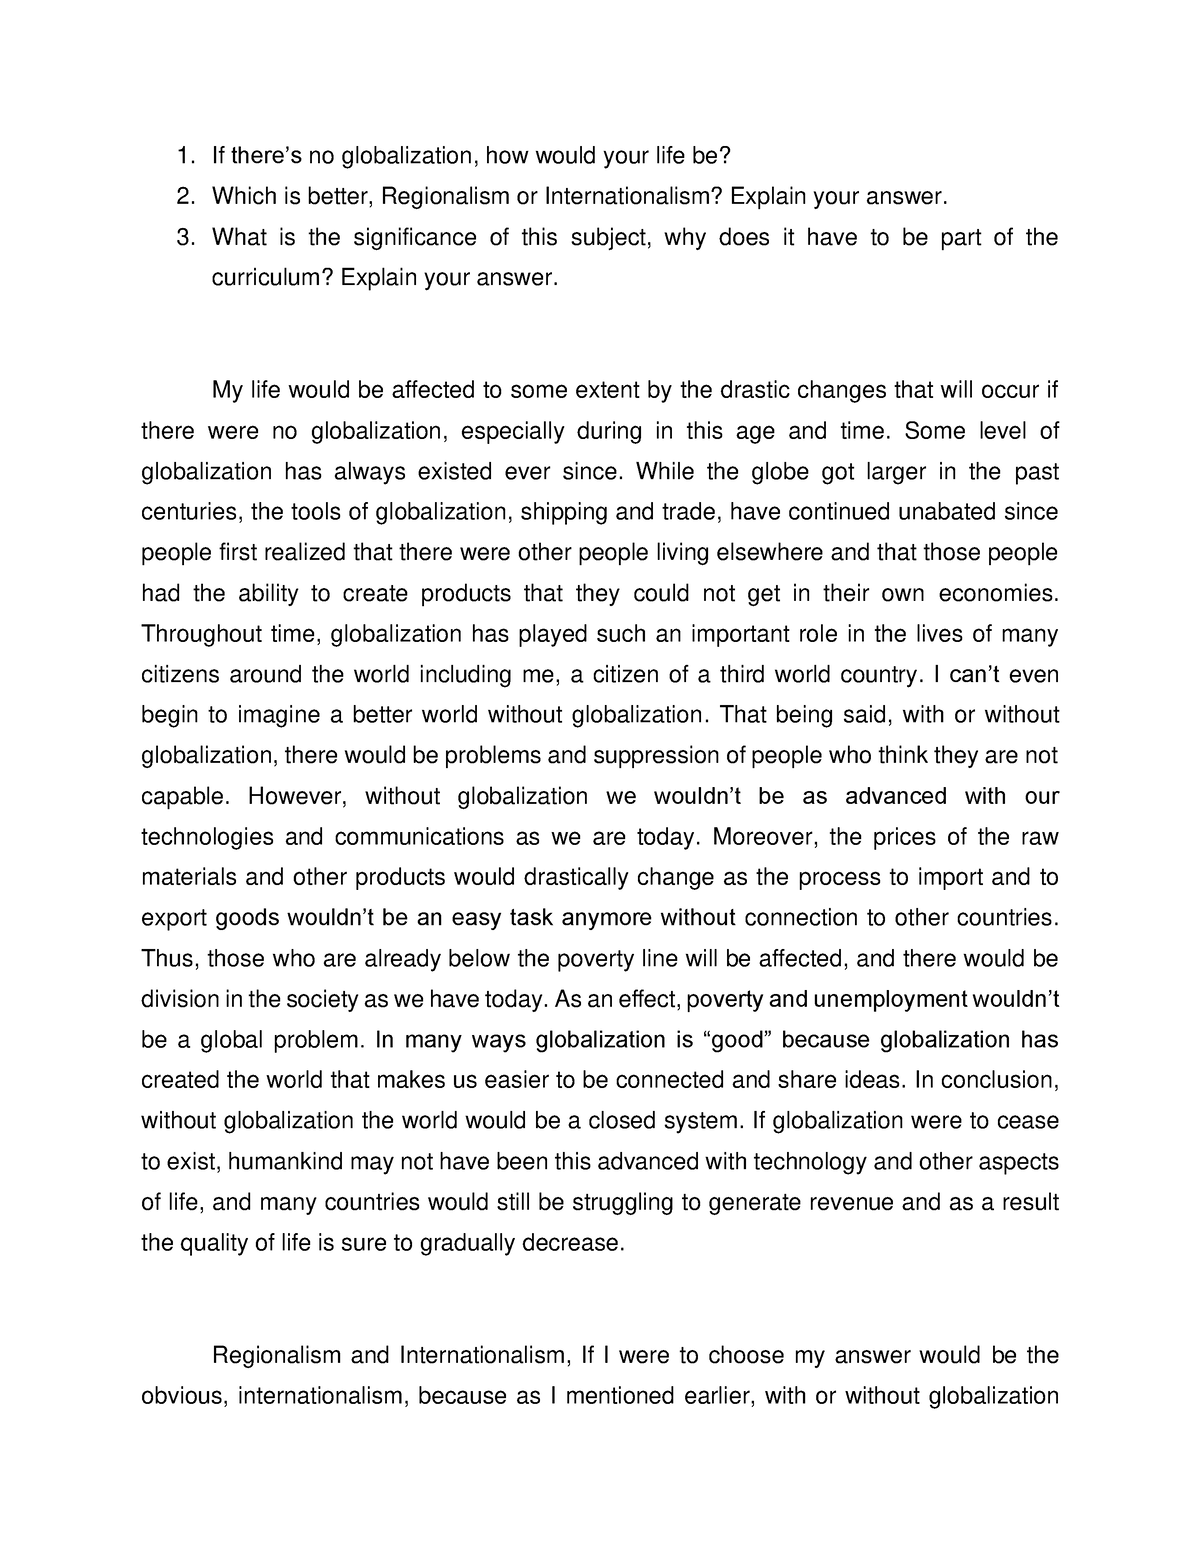 what is globalization in contemporary world essay